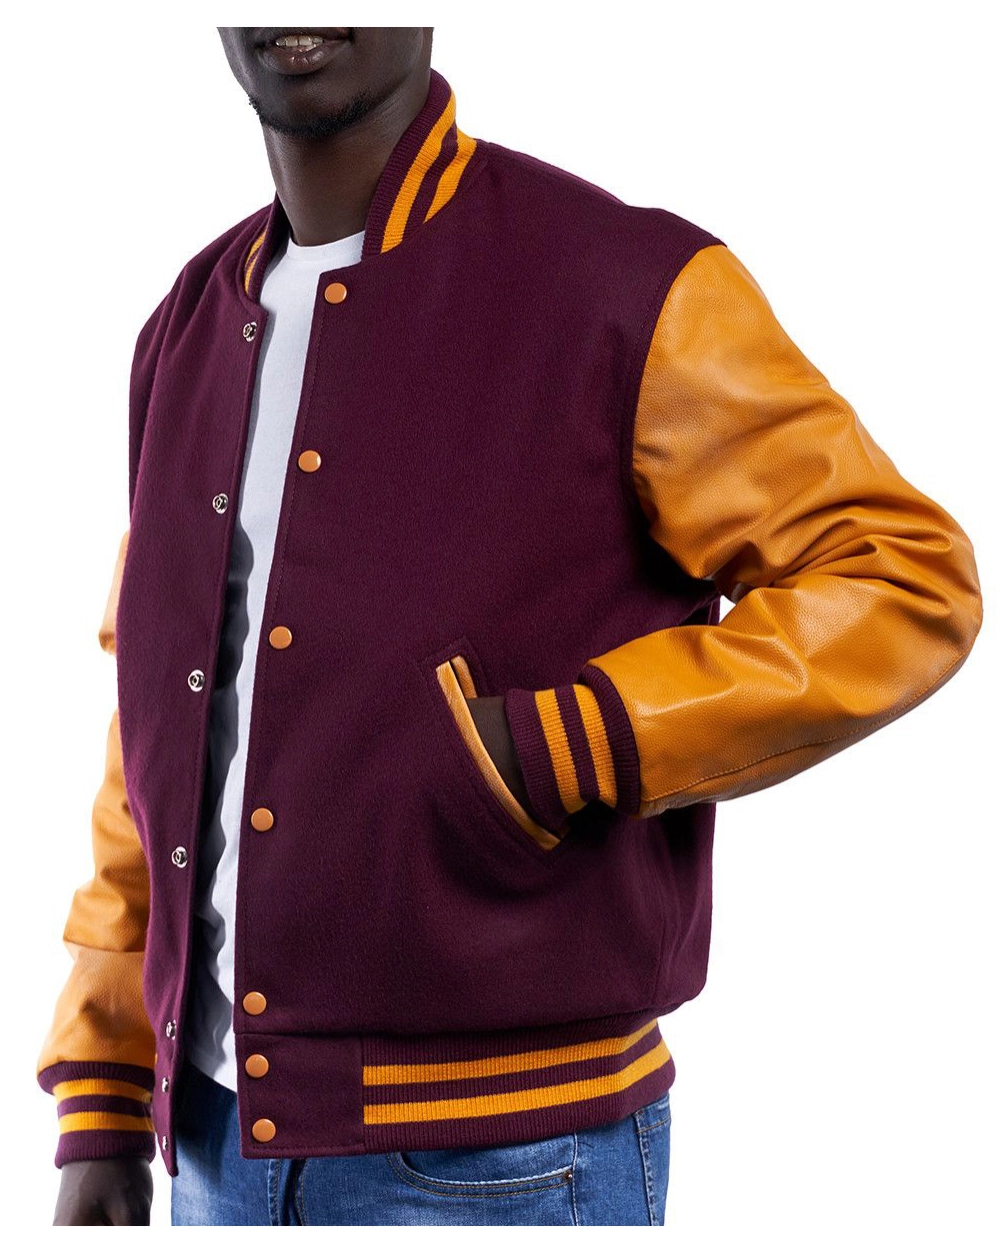 maroon-letterman Maroon Wool Body and Bright Gold Leather Sleeves Letterman Jacket